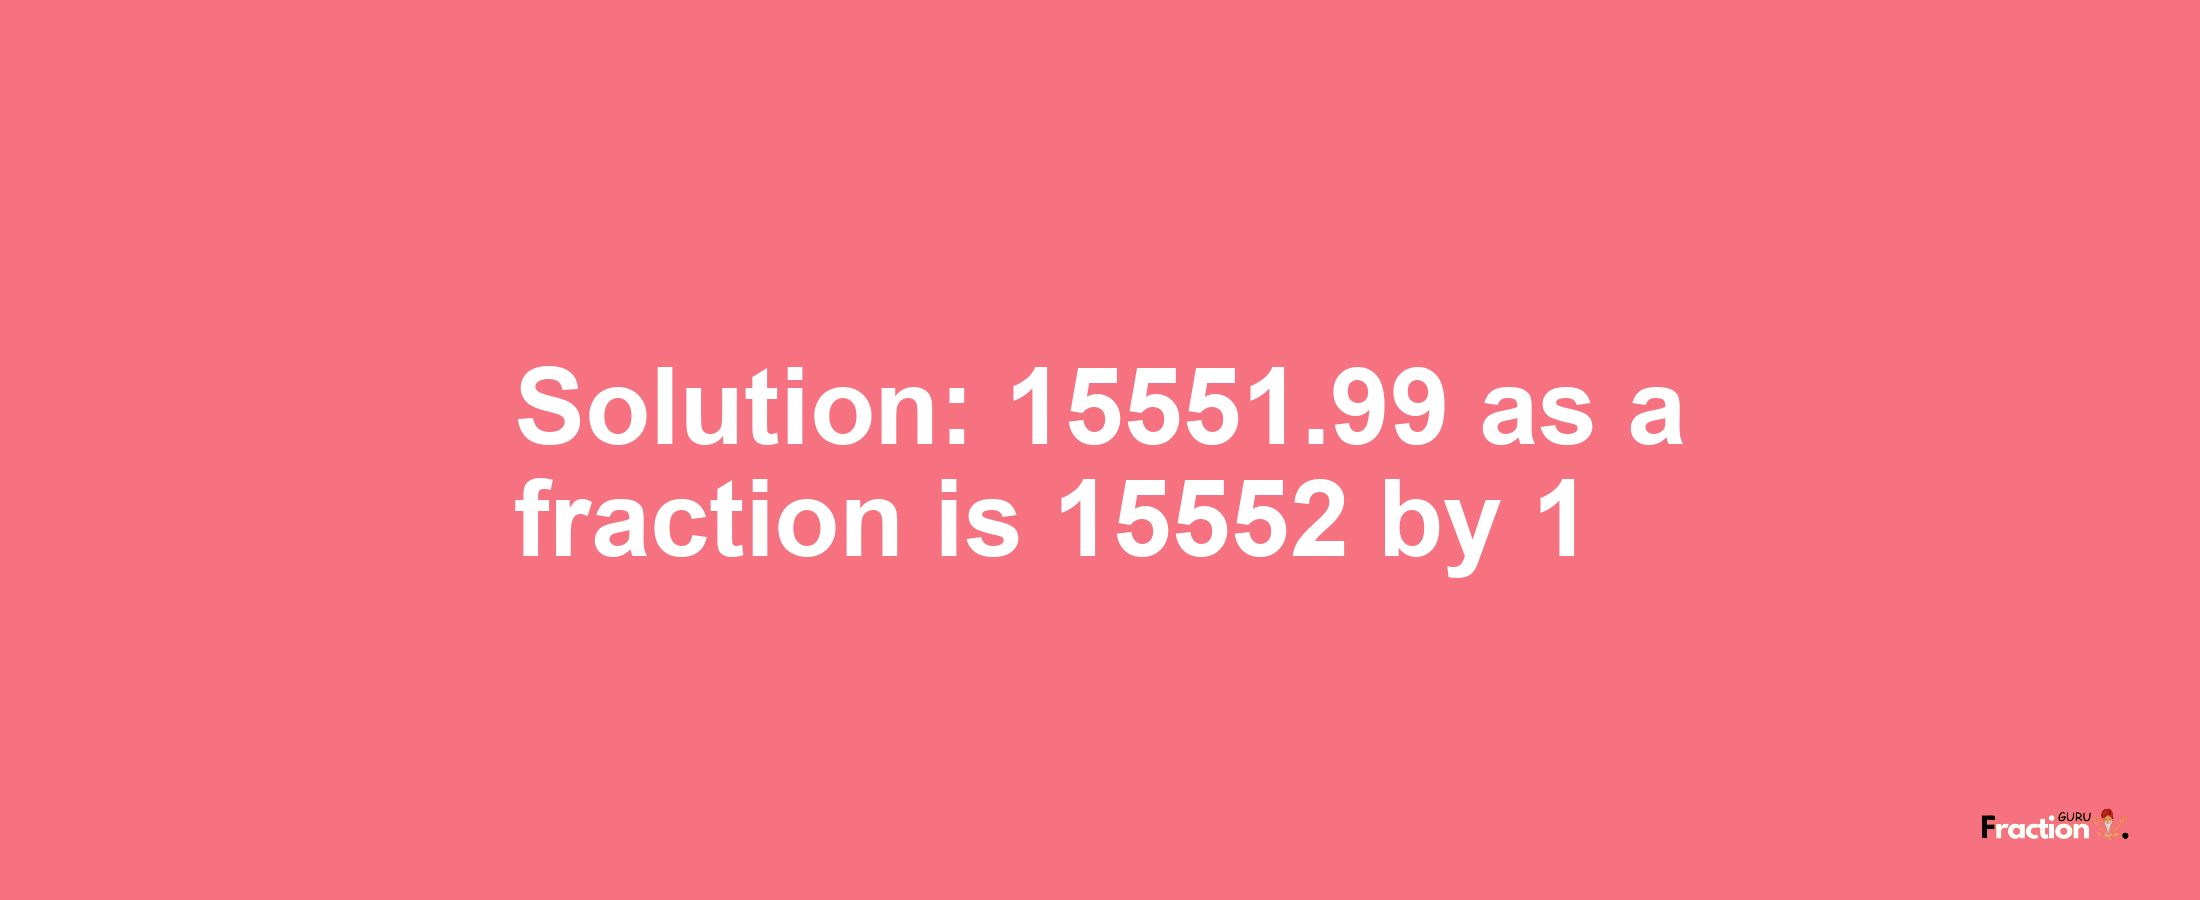 Solution:15551.99 as a fraction is 15552/1